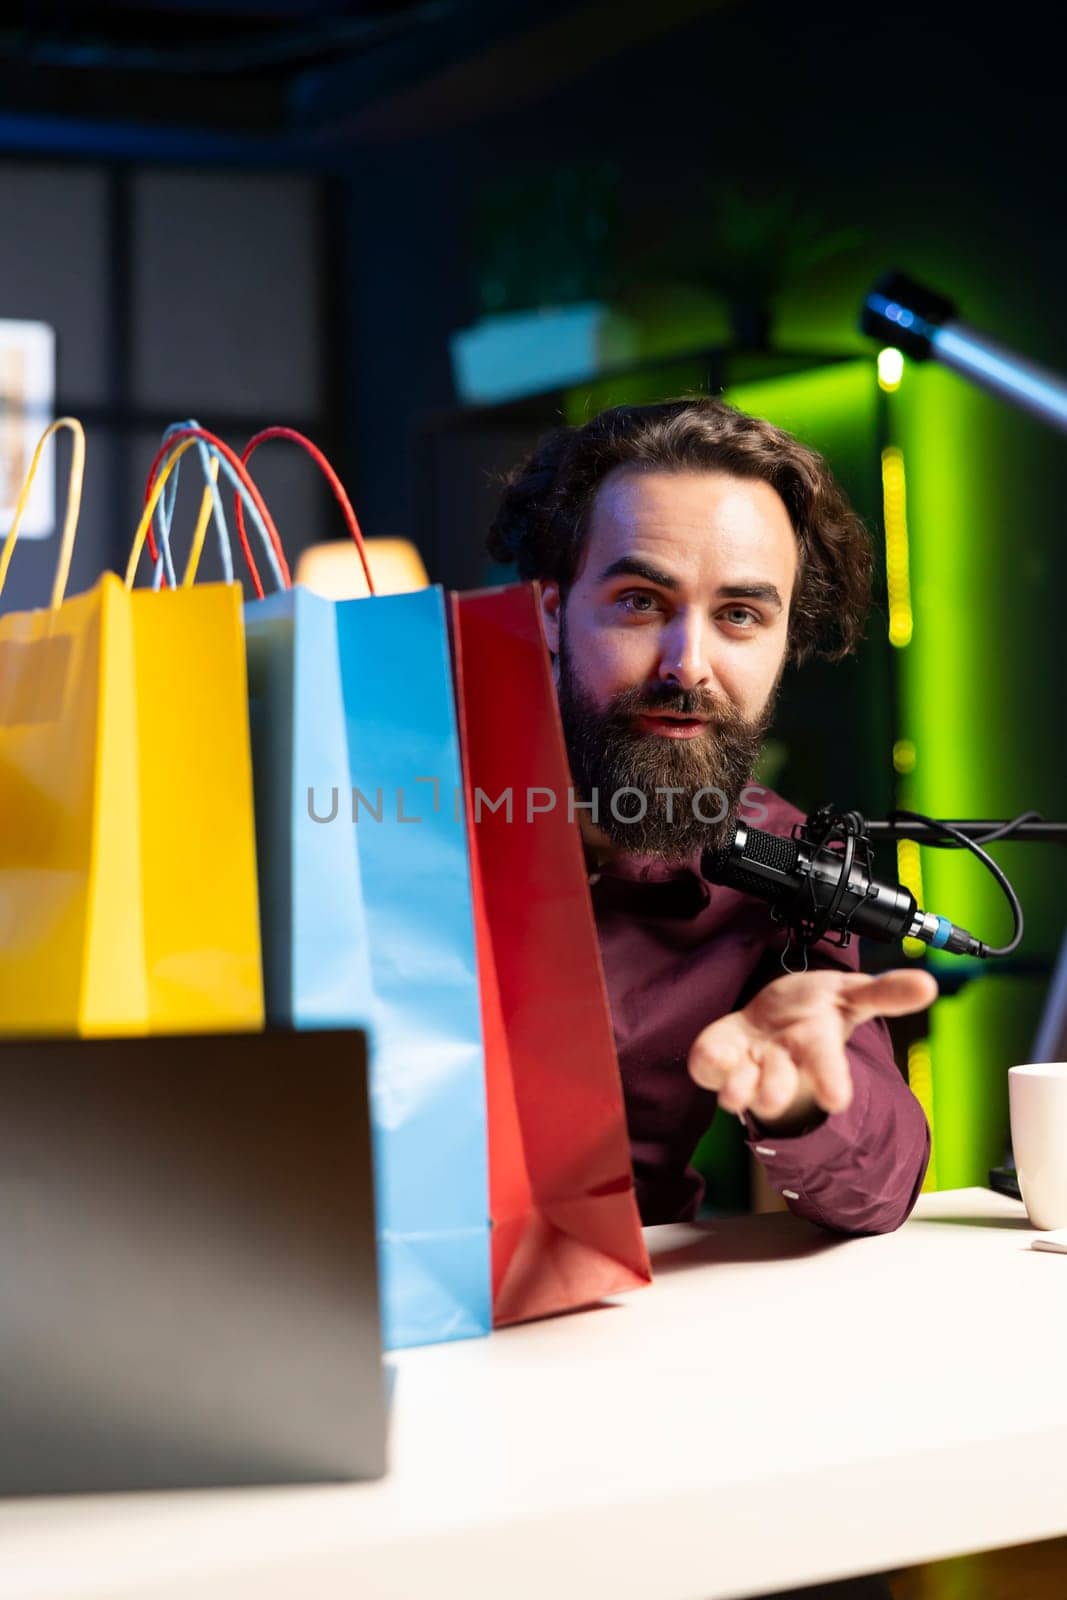 Content creator filming fashion vlog, unboxing bags with internet order, showing subscribers purchases he recently got. Man doing influencer marketing, presenting shopping acquisitions from sponsor